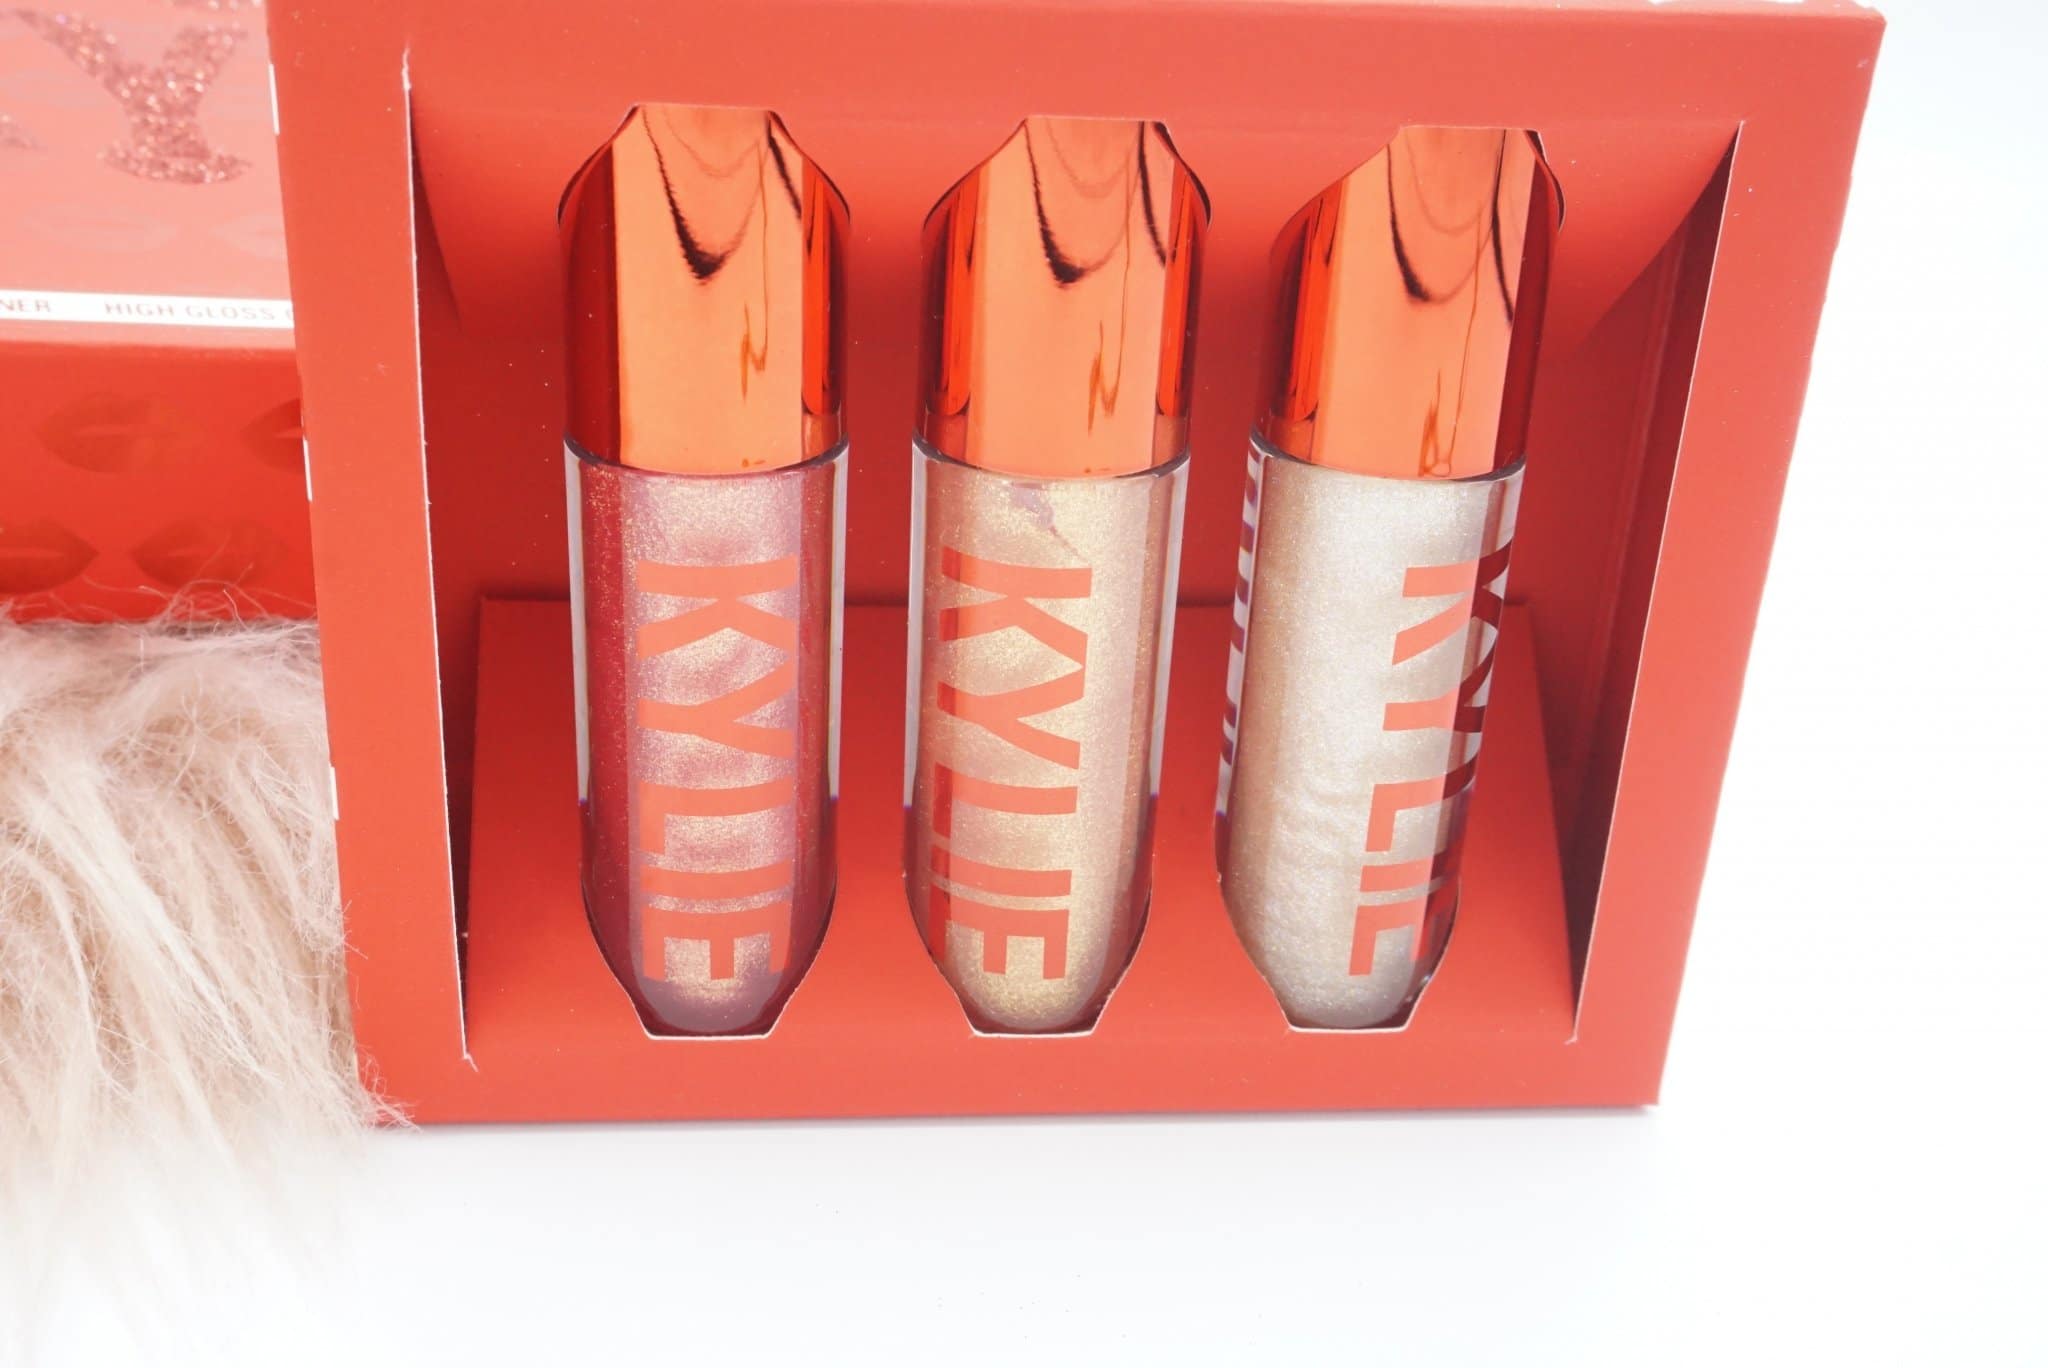 Christmassy Kylie Cosmetics Holiday 2019 Collection Review